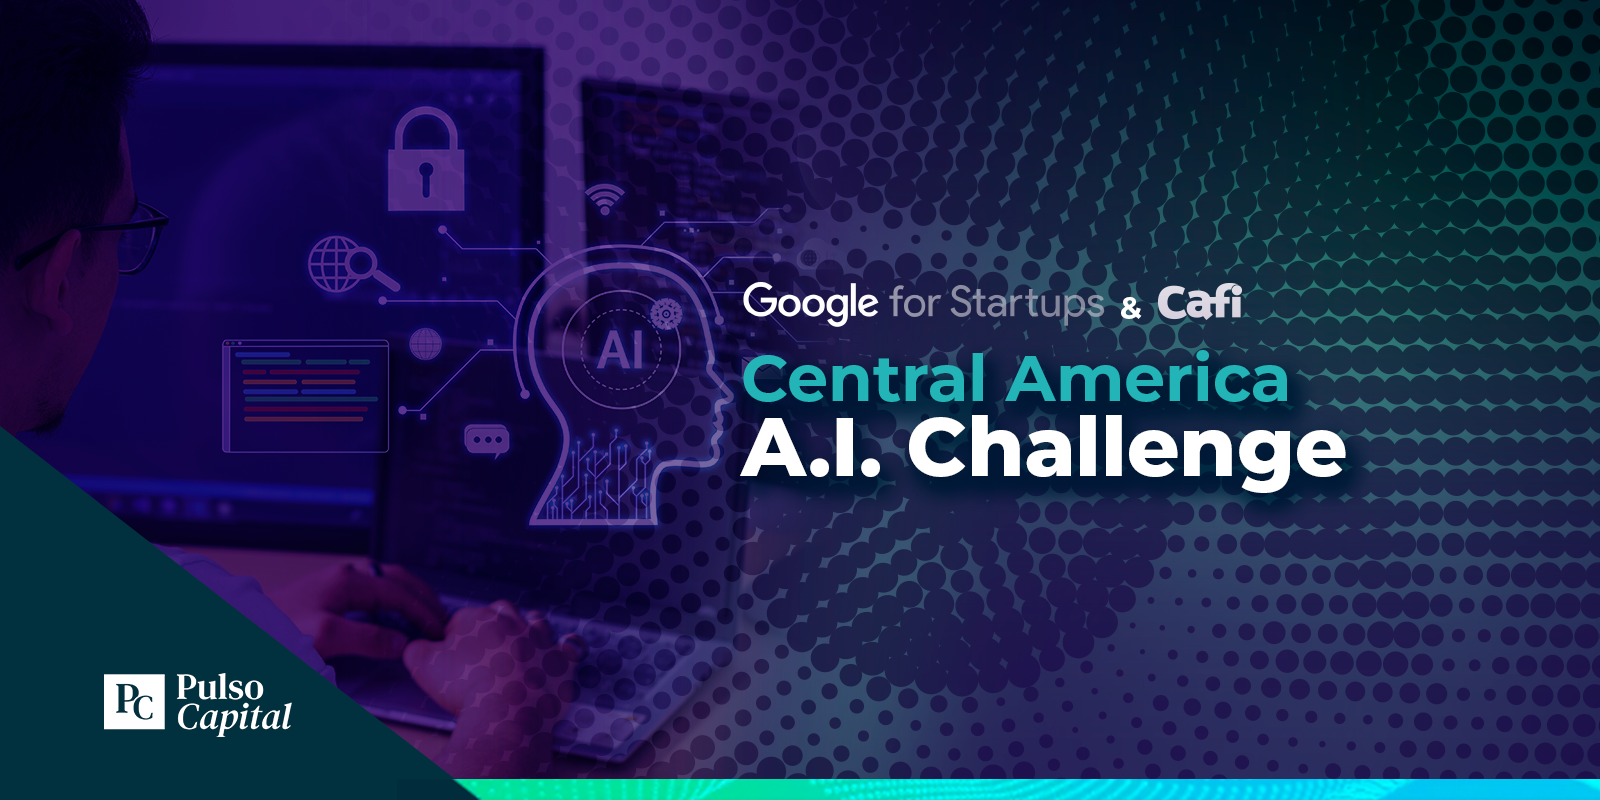 Central America A.I. Challenge